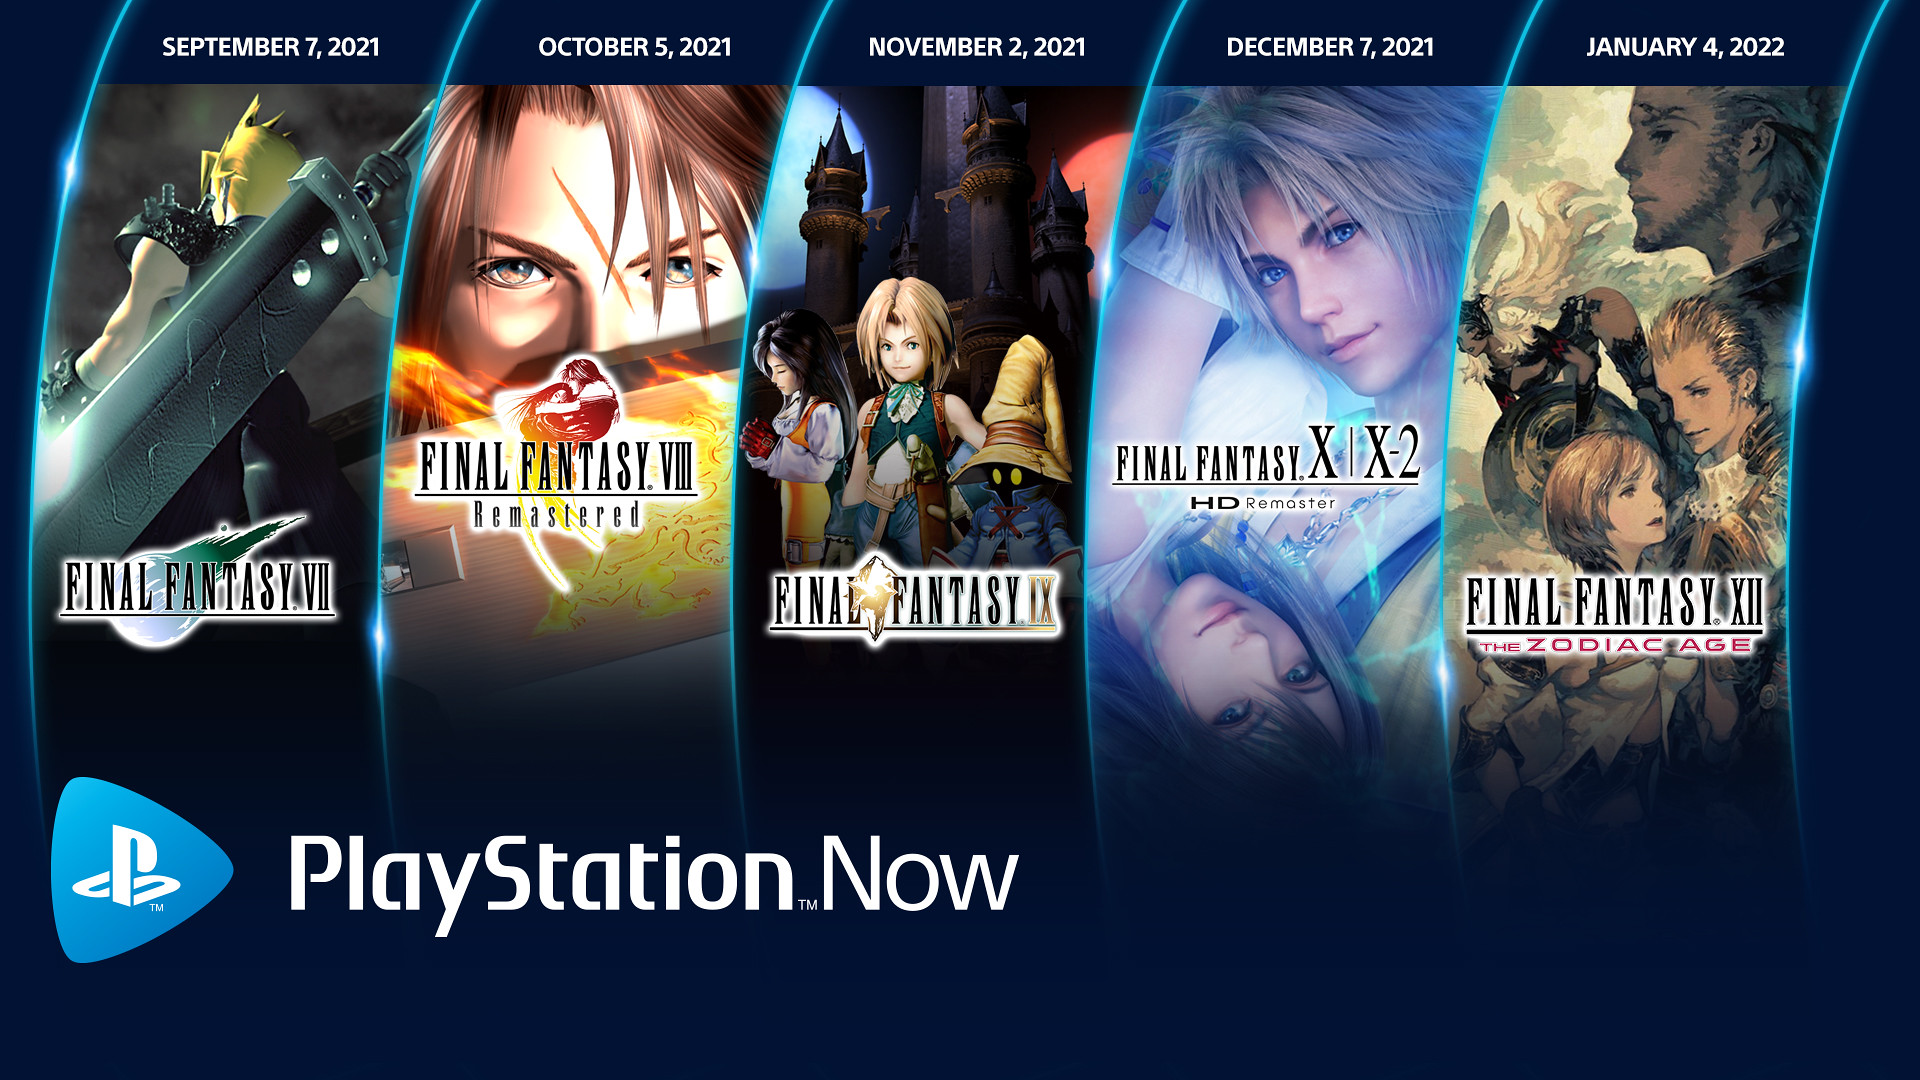 PlayStation Now to add one Final Fantasy game per month for five months starting September 7 – Gematsu